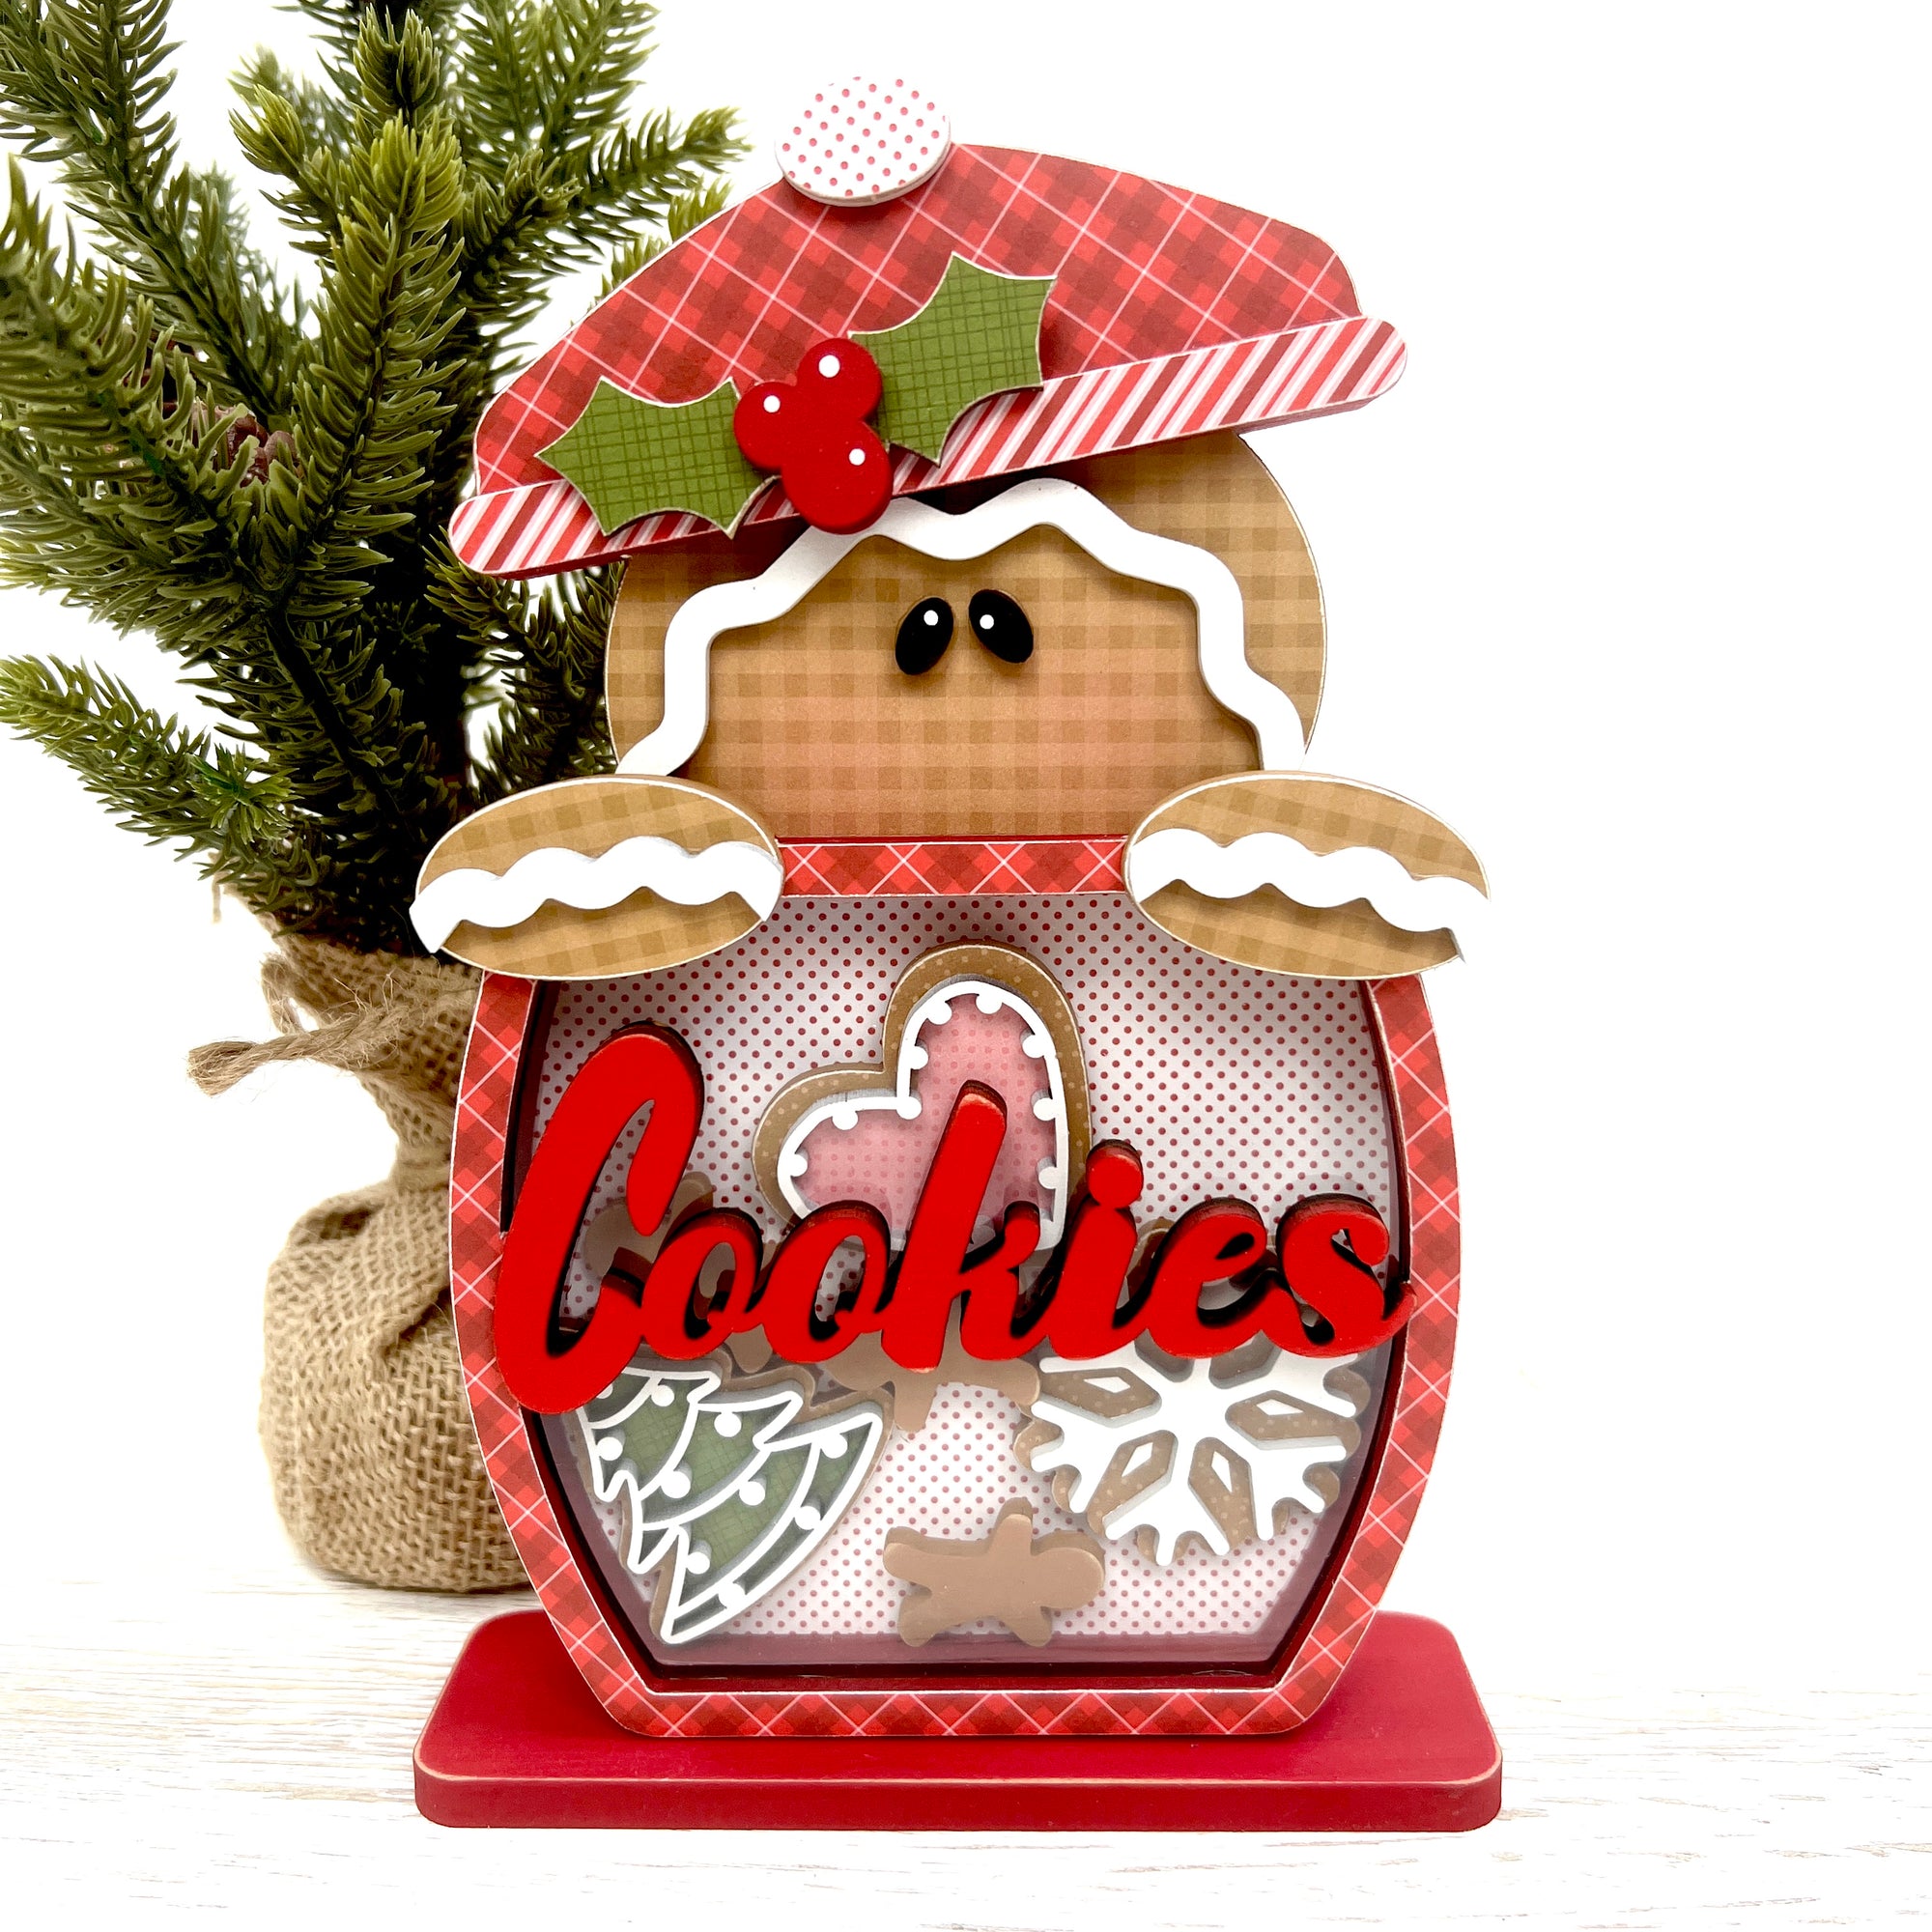 Gingerbread wood decor with a gingerbread man popping out of a cookie jar with a clear front and christmas cookies inside.